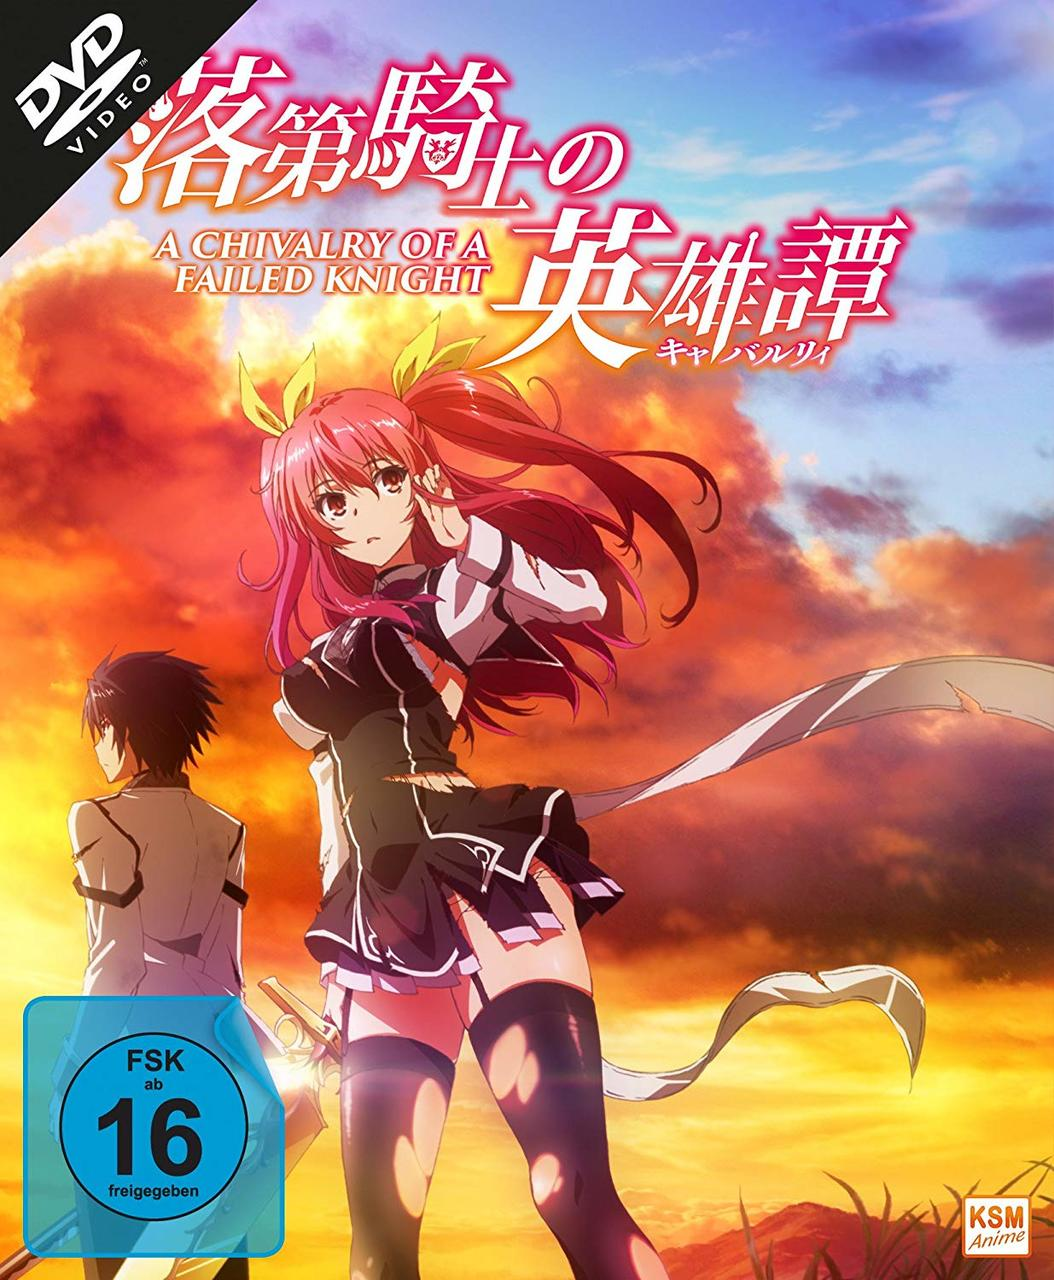 A Chivalry of (Episoden - DVD 1-12) a Failed Gesamtedition Knight